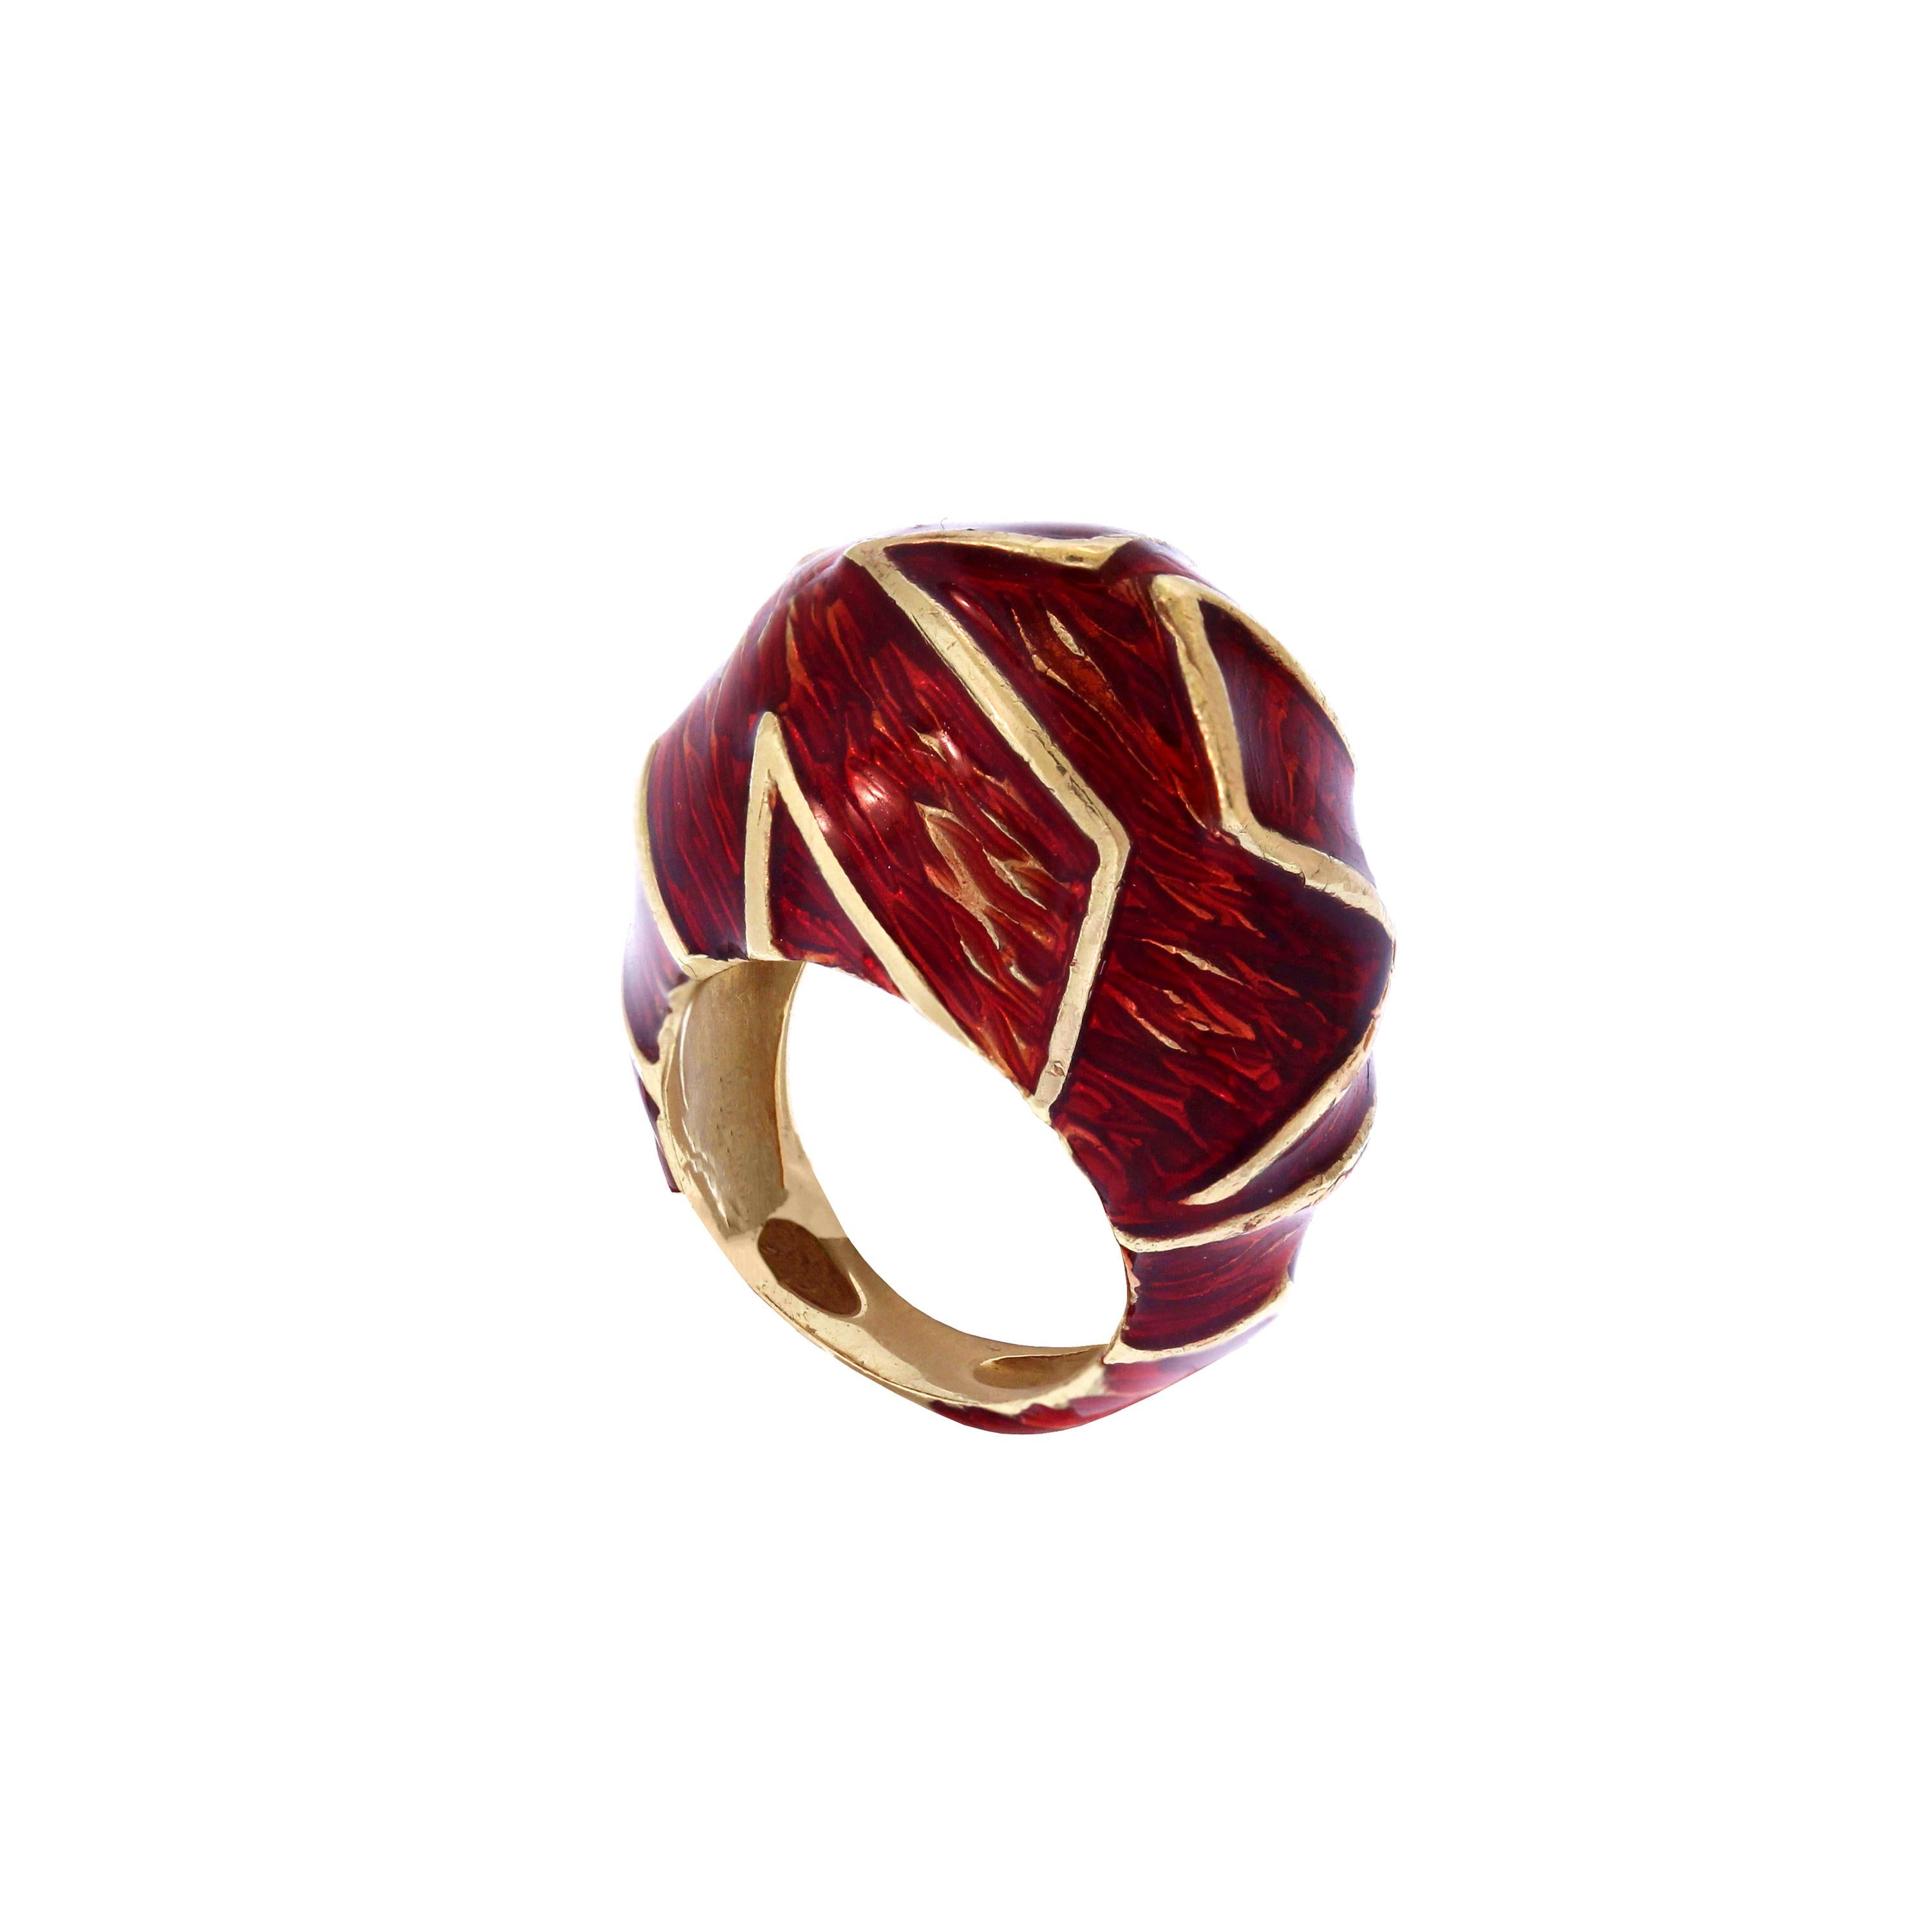 0.7 inch ring size